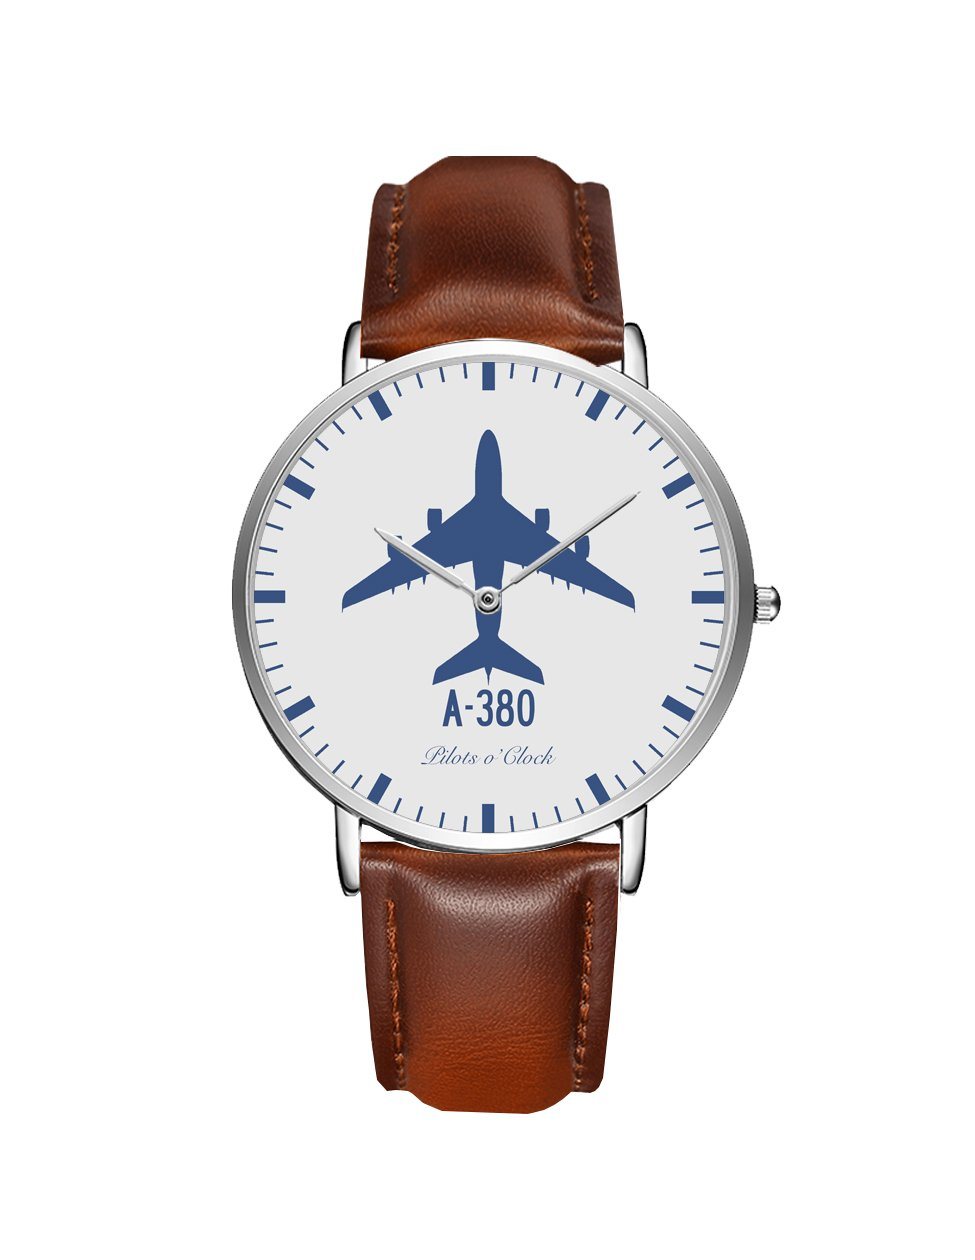 Airbus A380 Leather Strap Watches Pilot Eyes Store Silver & Brown Leather Strap 